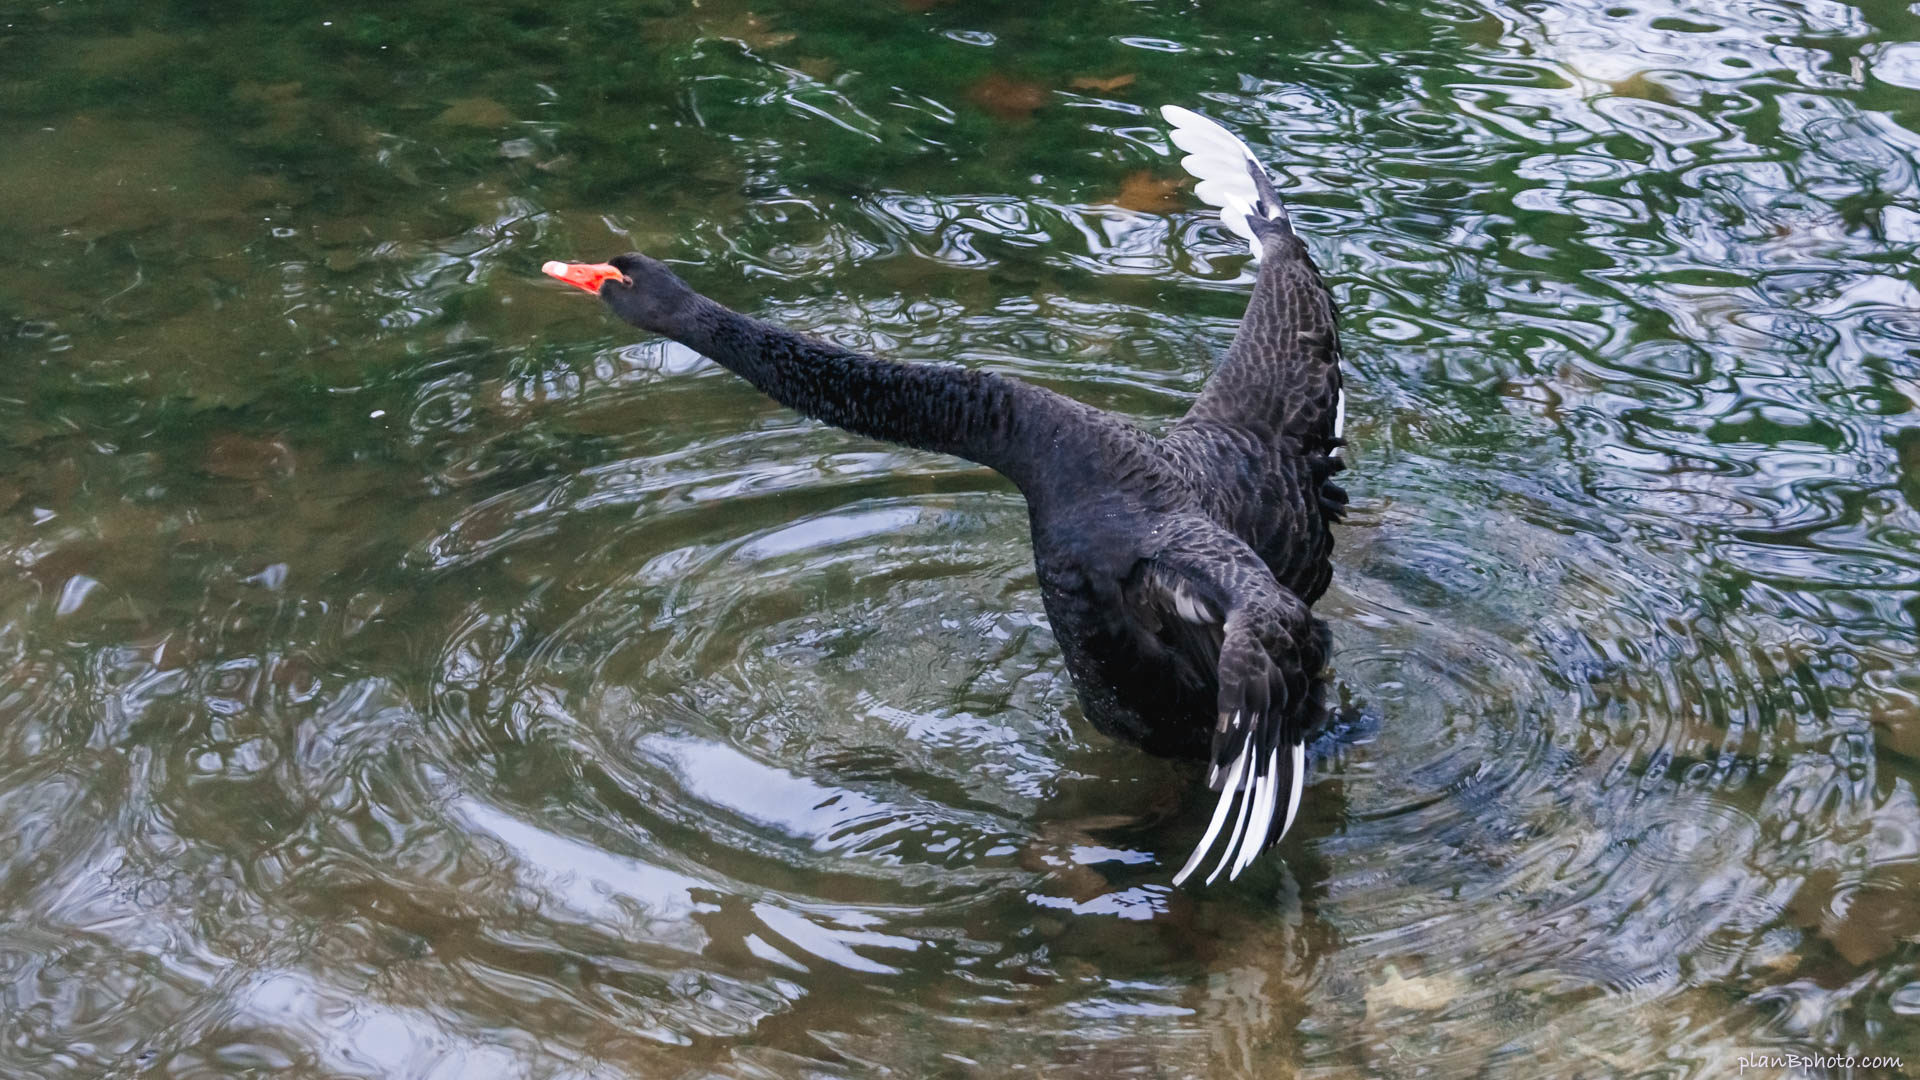 Black swan stretching his neck and wings